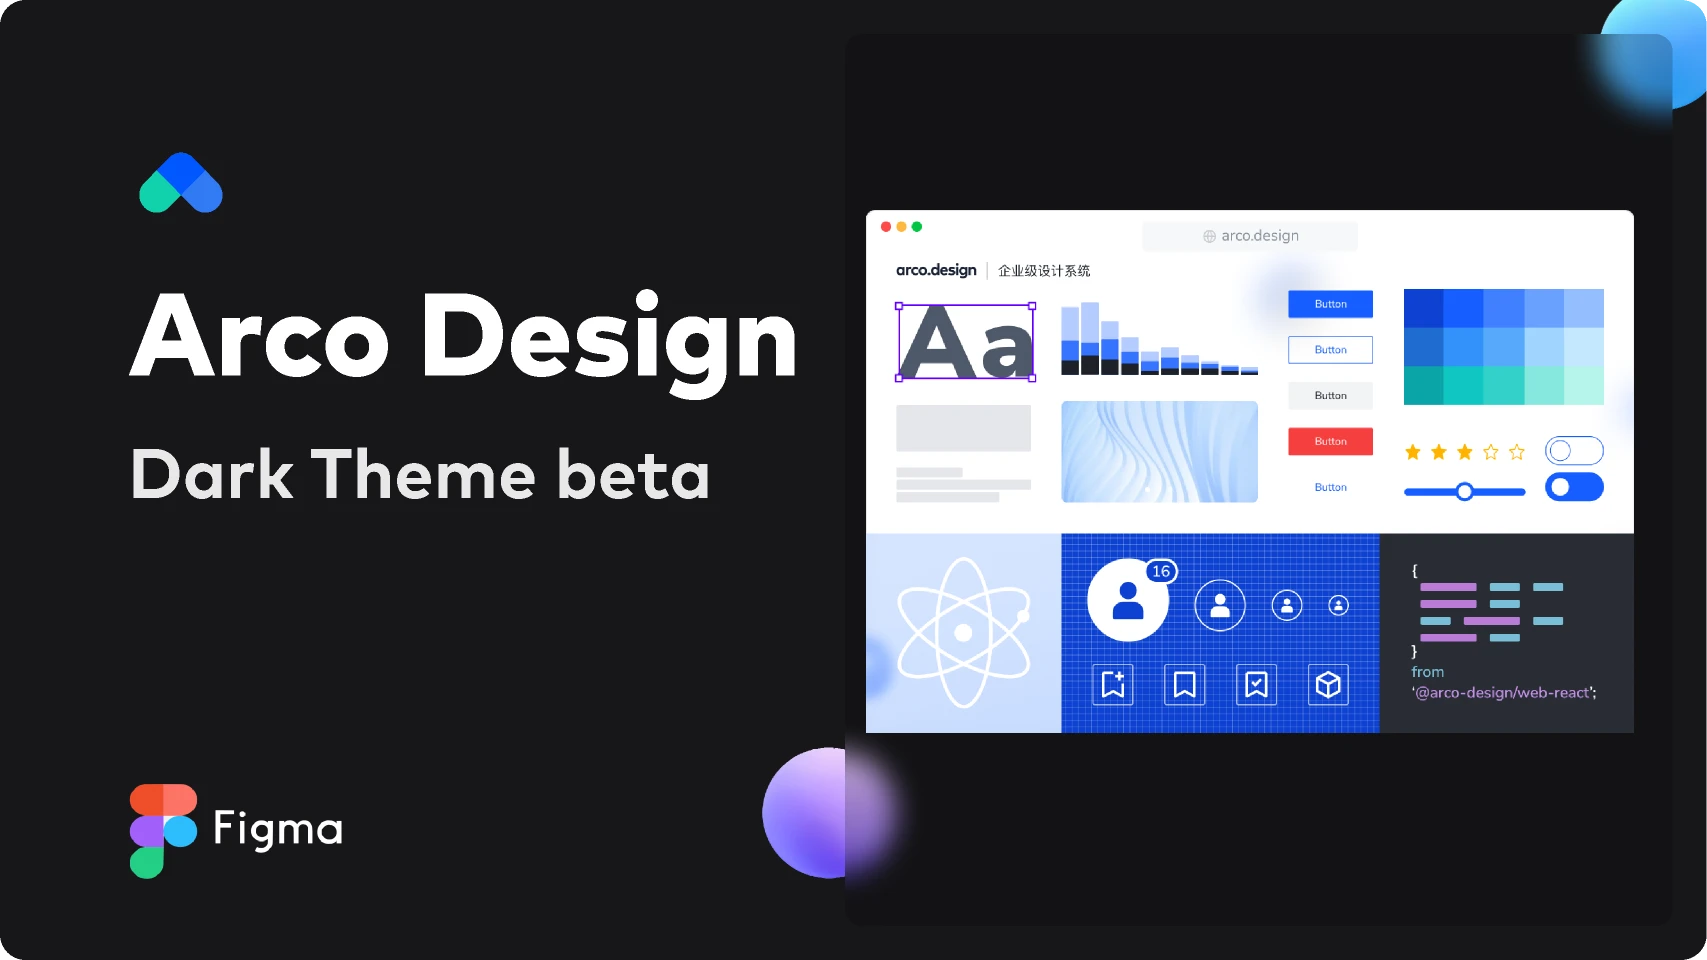 Arco Design System Dark Theme for Figma and Adobe XD